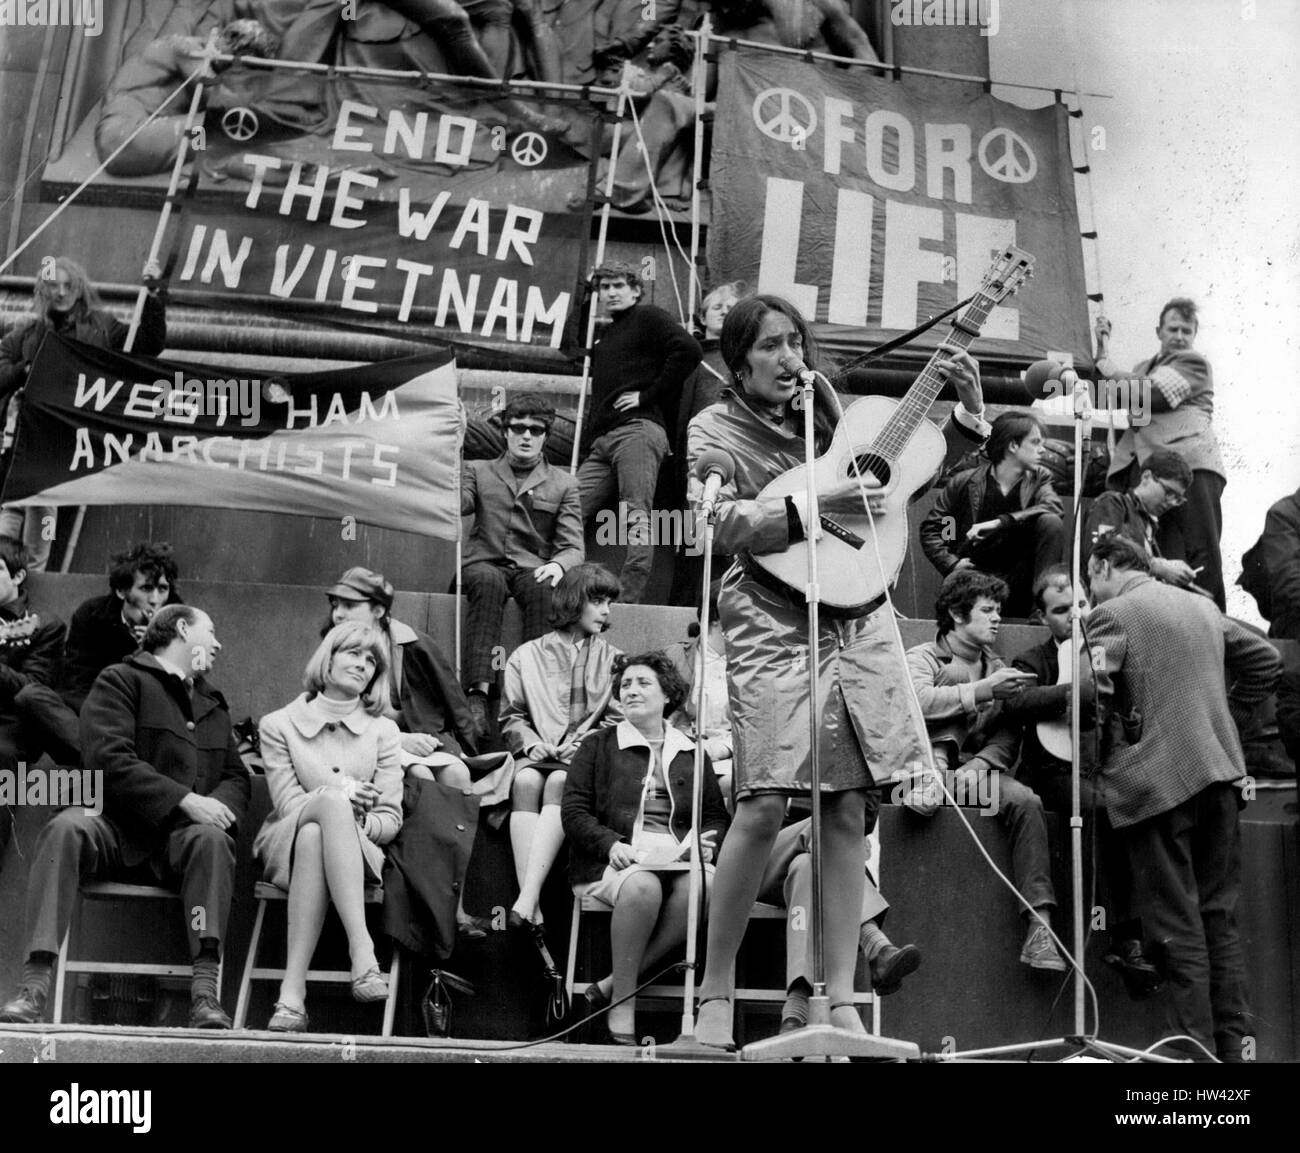 May 05, 1965 - Peace In Vietnam Meeting In Trafalgar Square: The American folk singer and freedom marcher Joan Bafz, lead a march to stop the War in Vietnam The March is Organised jointly by the Campaign for Nuclear Disbarment and committee of 100. They marched from Marble Arch to Trafalgar Sq. to hold the Rally, after which they will go to Downing St to give message to the Prime Minister Mr. Wilson. Photo Shows Joan Baez the American Folk Singer playing to the mass Rally in Trafalgar Sq this afternoon. (Credit Image: © Keystone Press Agency/Keystone USA via ZUMAPRESS.com) Stock Photo